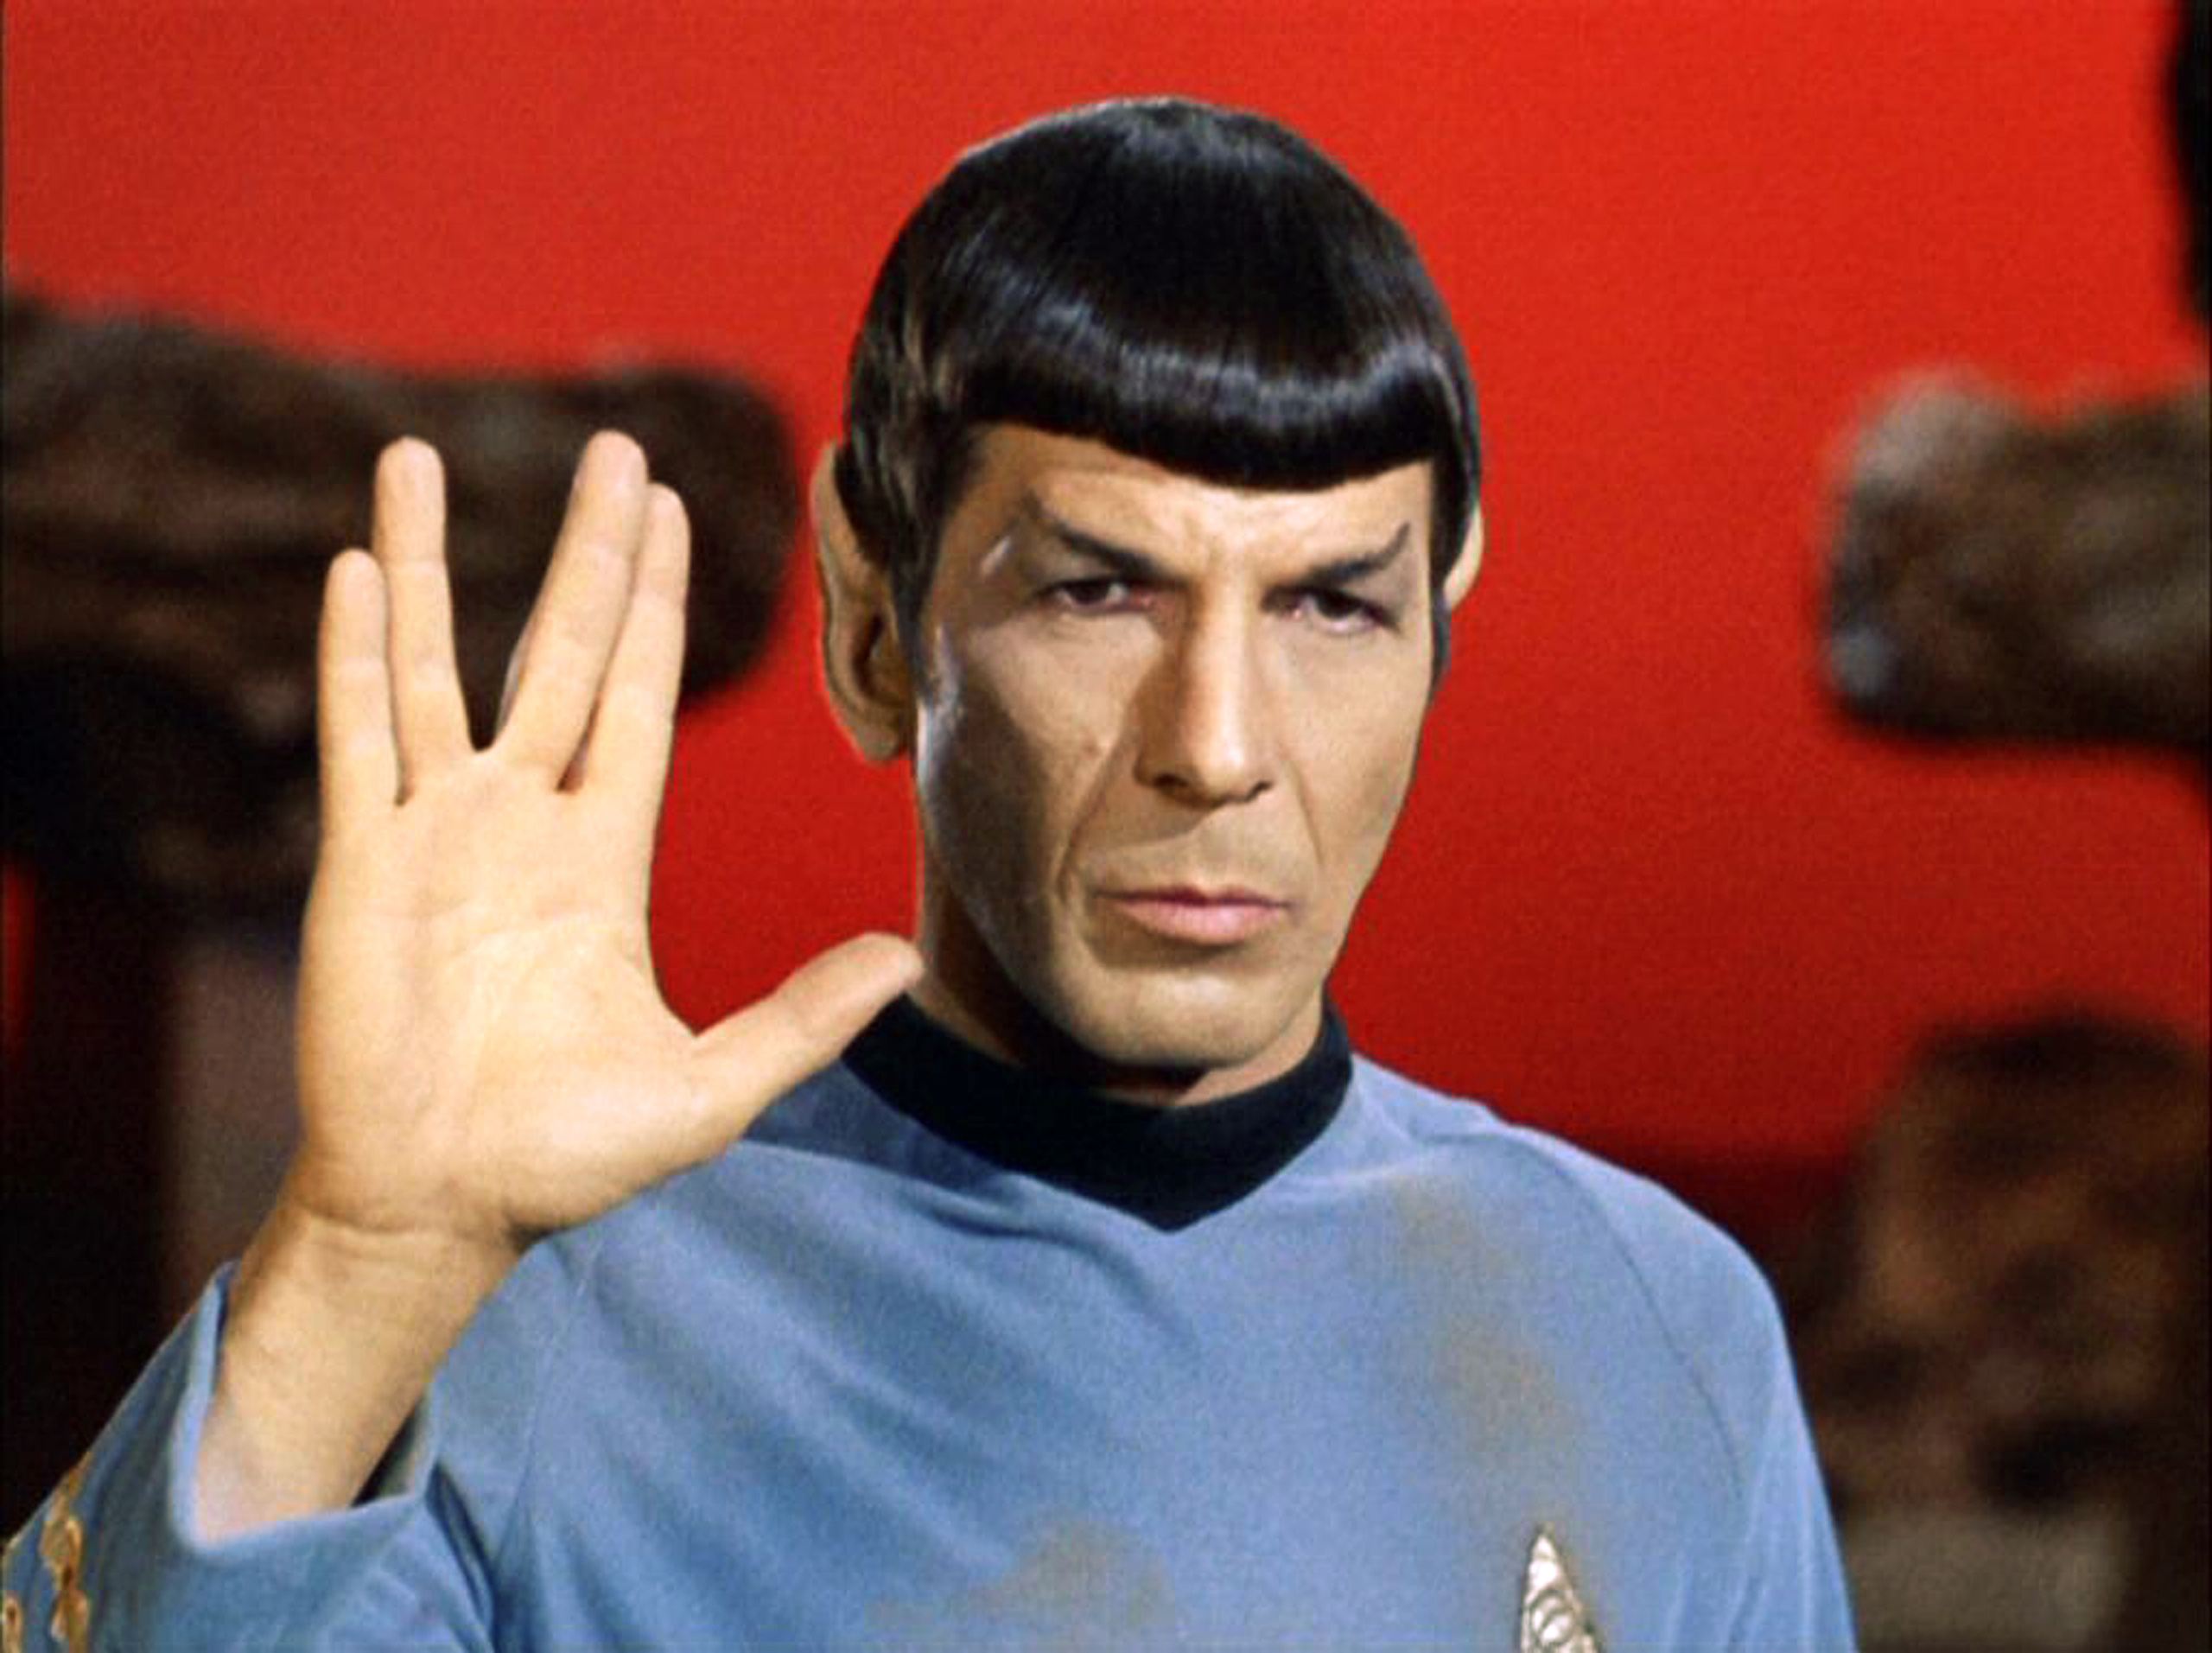 Spock shows the Vulcan salute, usually accompanied with the words, "Live long and prosper'" Sept. 15, 1967. (CBS/Getty Images)